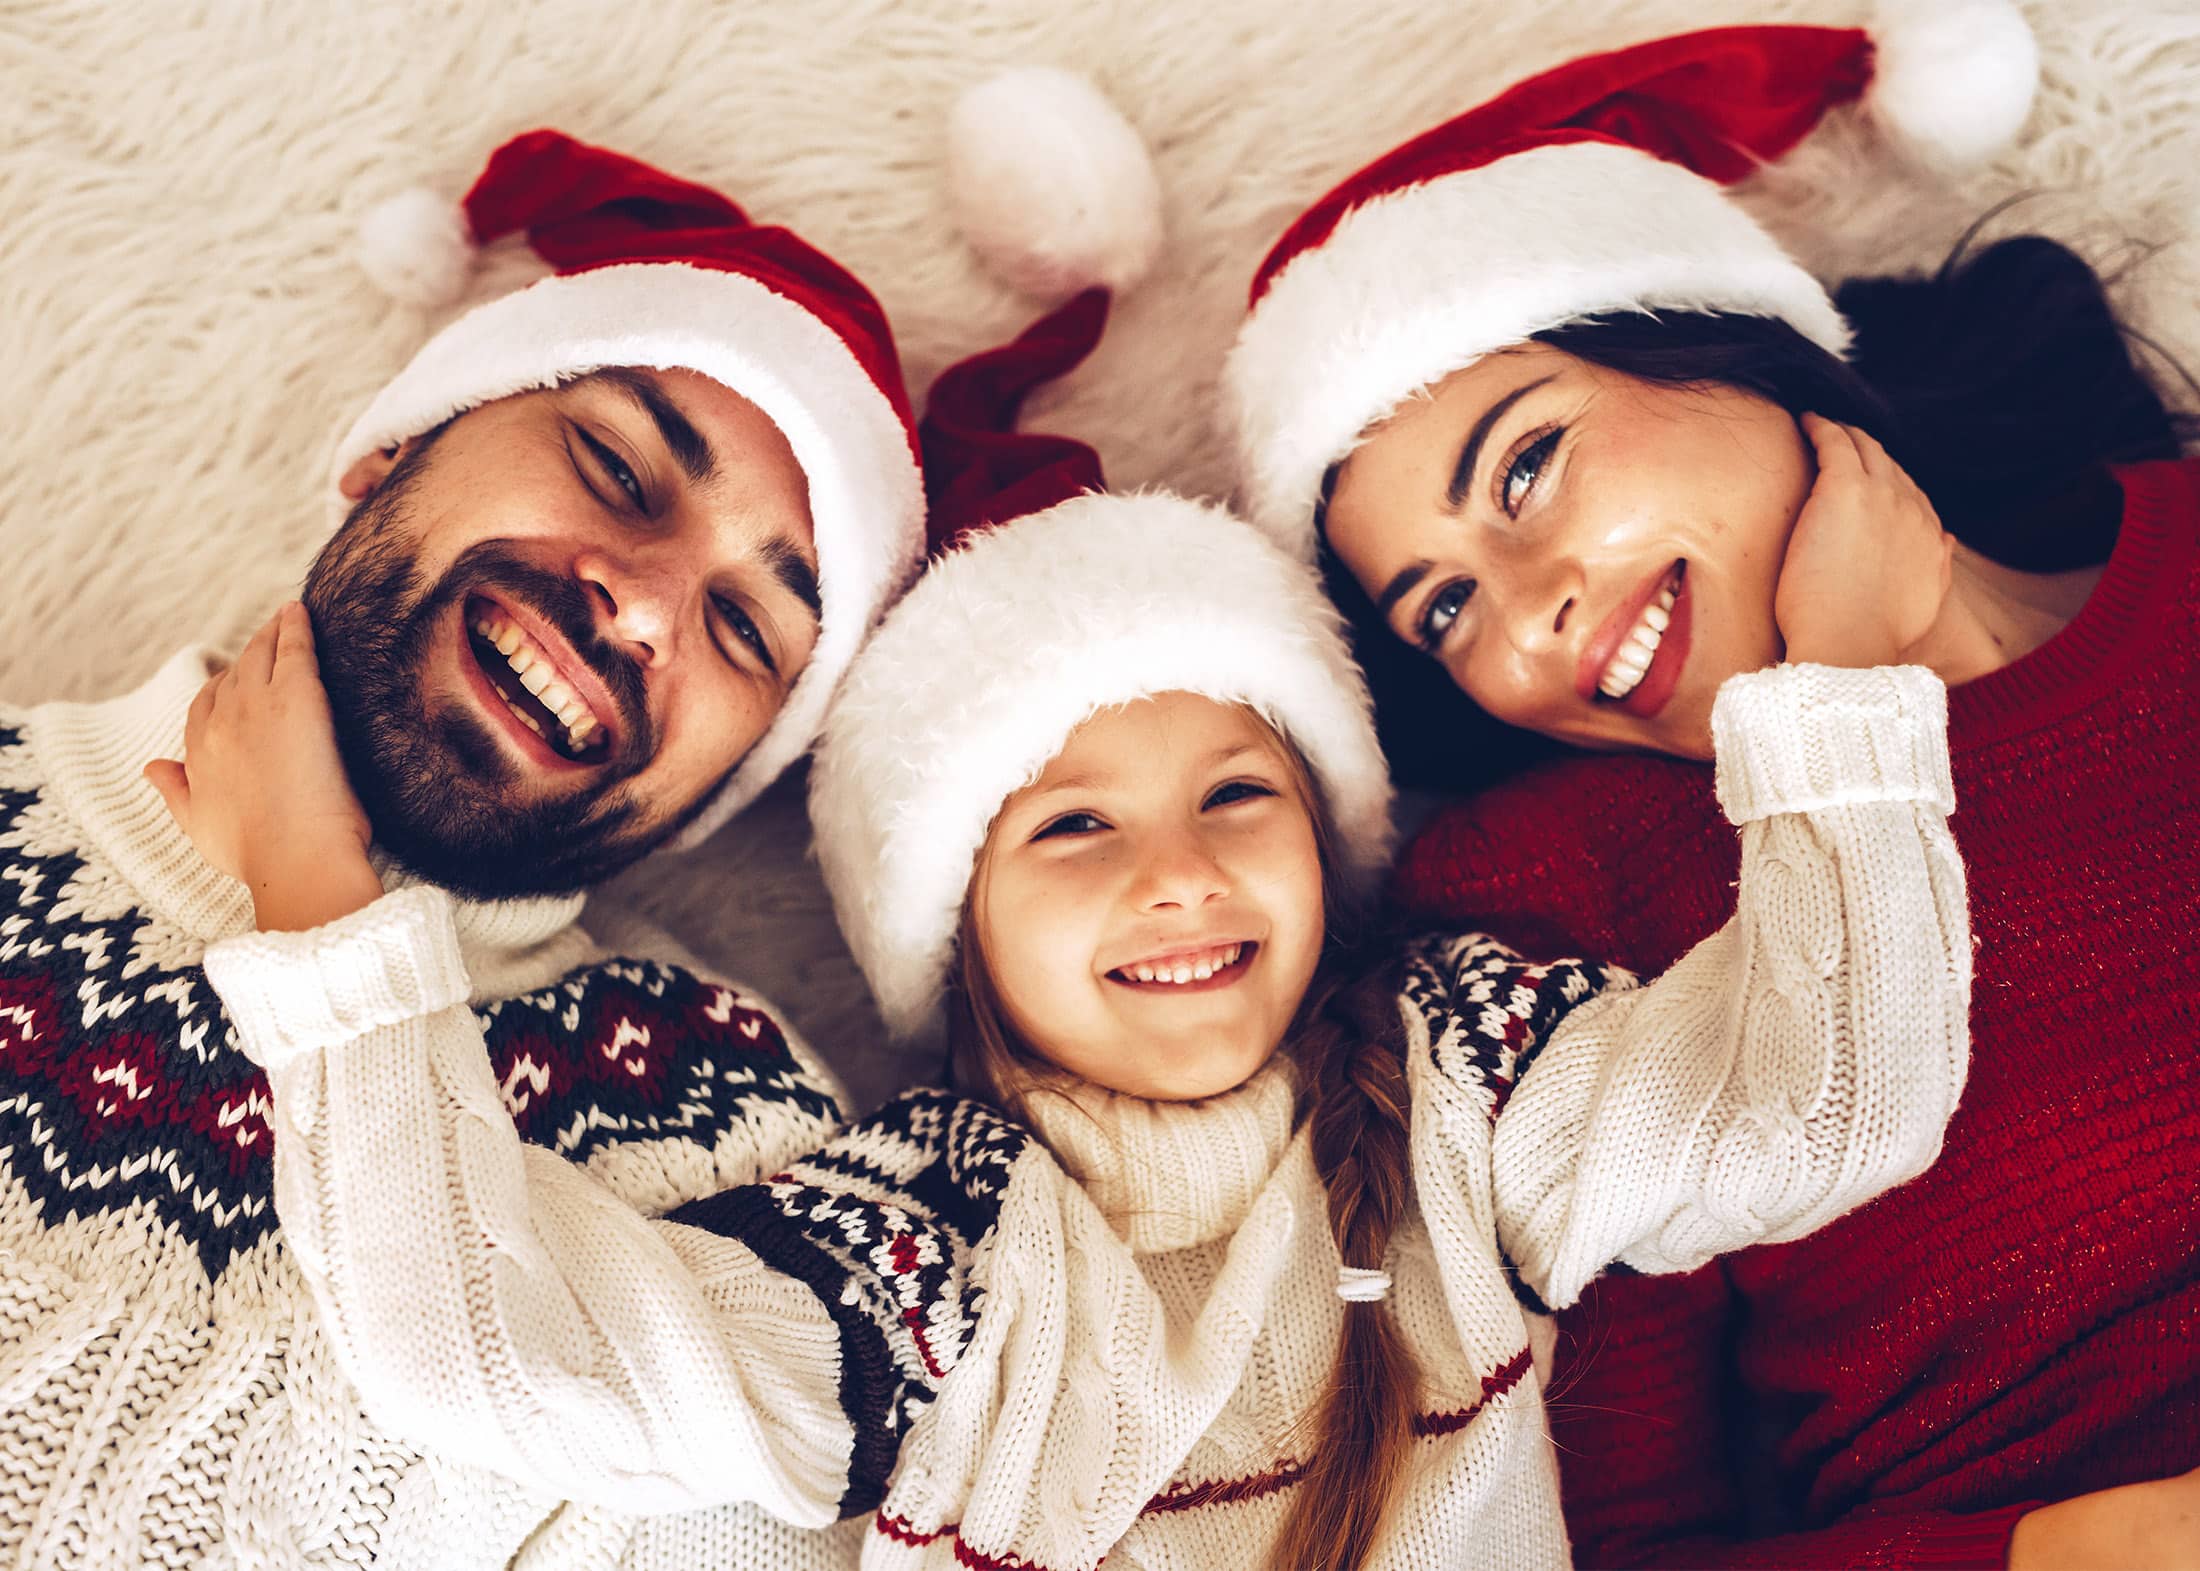 Christmas family! Happy mom,dad and little daughter on Santa Claus hats lying down. Enjoyng love hugs, holidays people. Togetherness concept